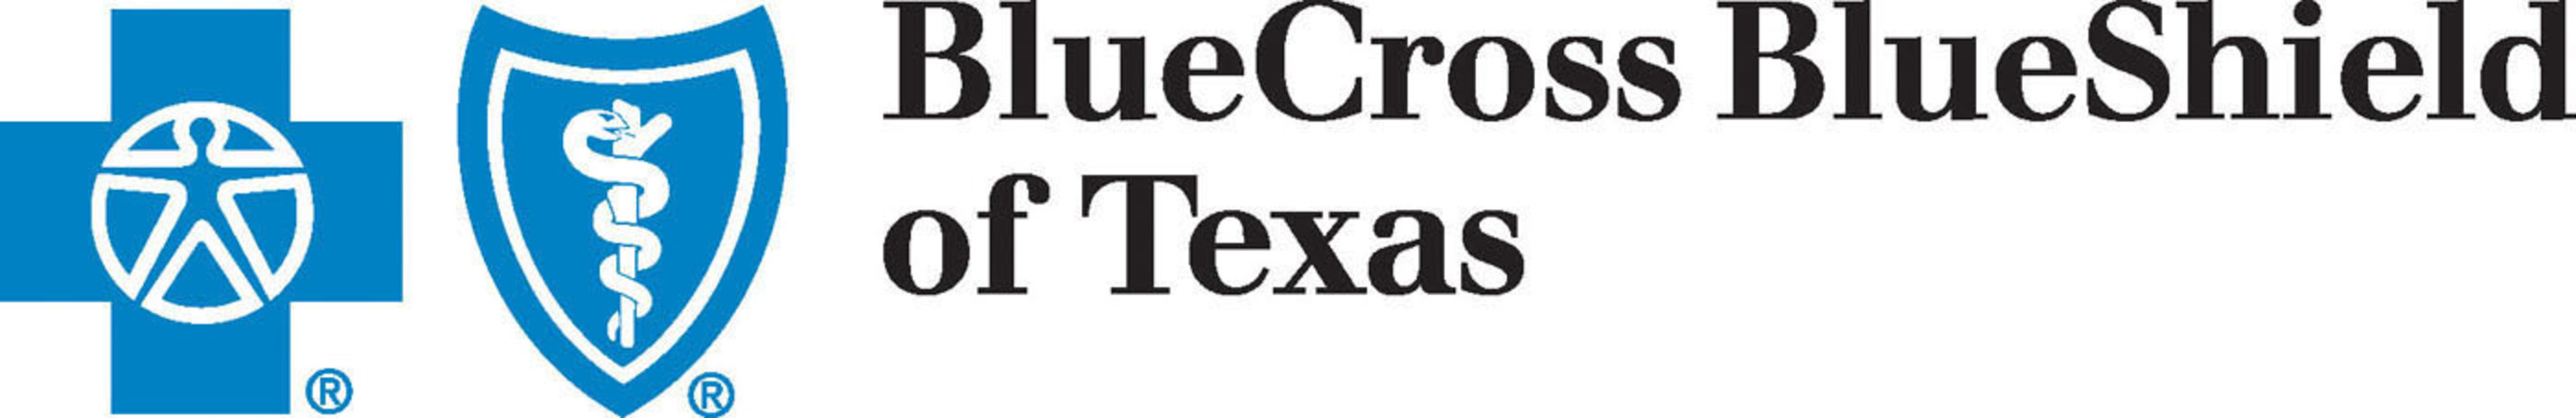 blue-cross-and-blue-shield-of-texas-expands-coverage-areas-for-its